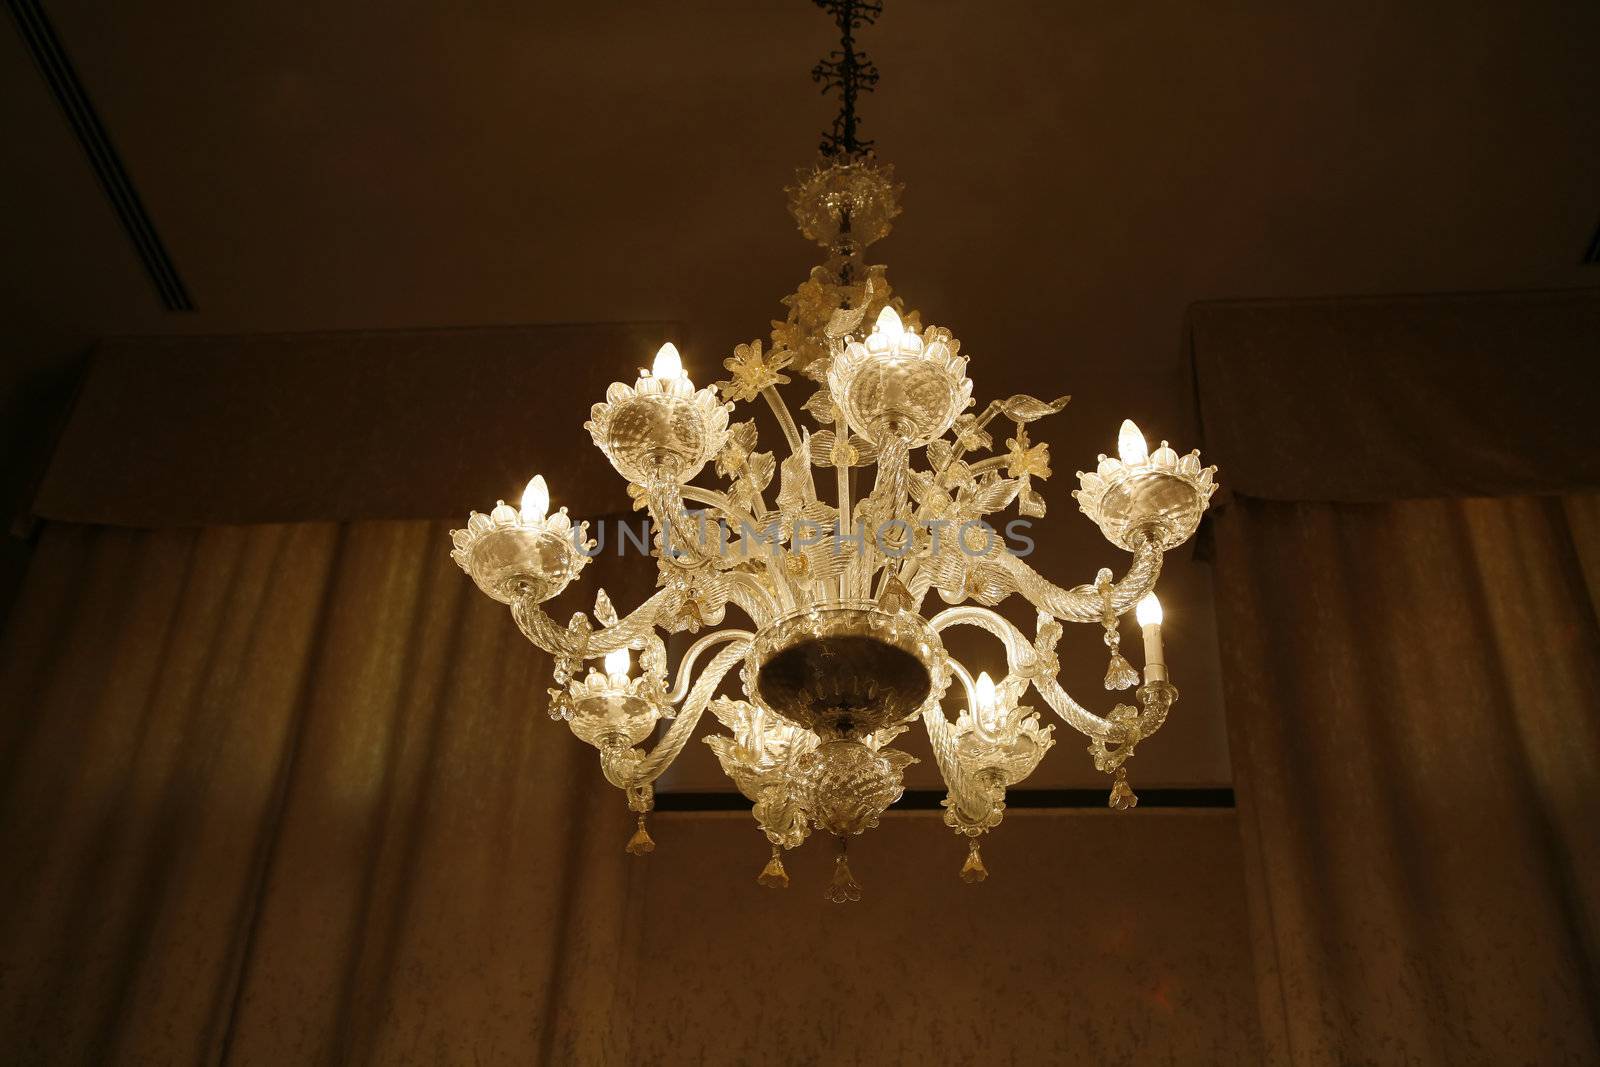 Antique chandelier by ABCDK